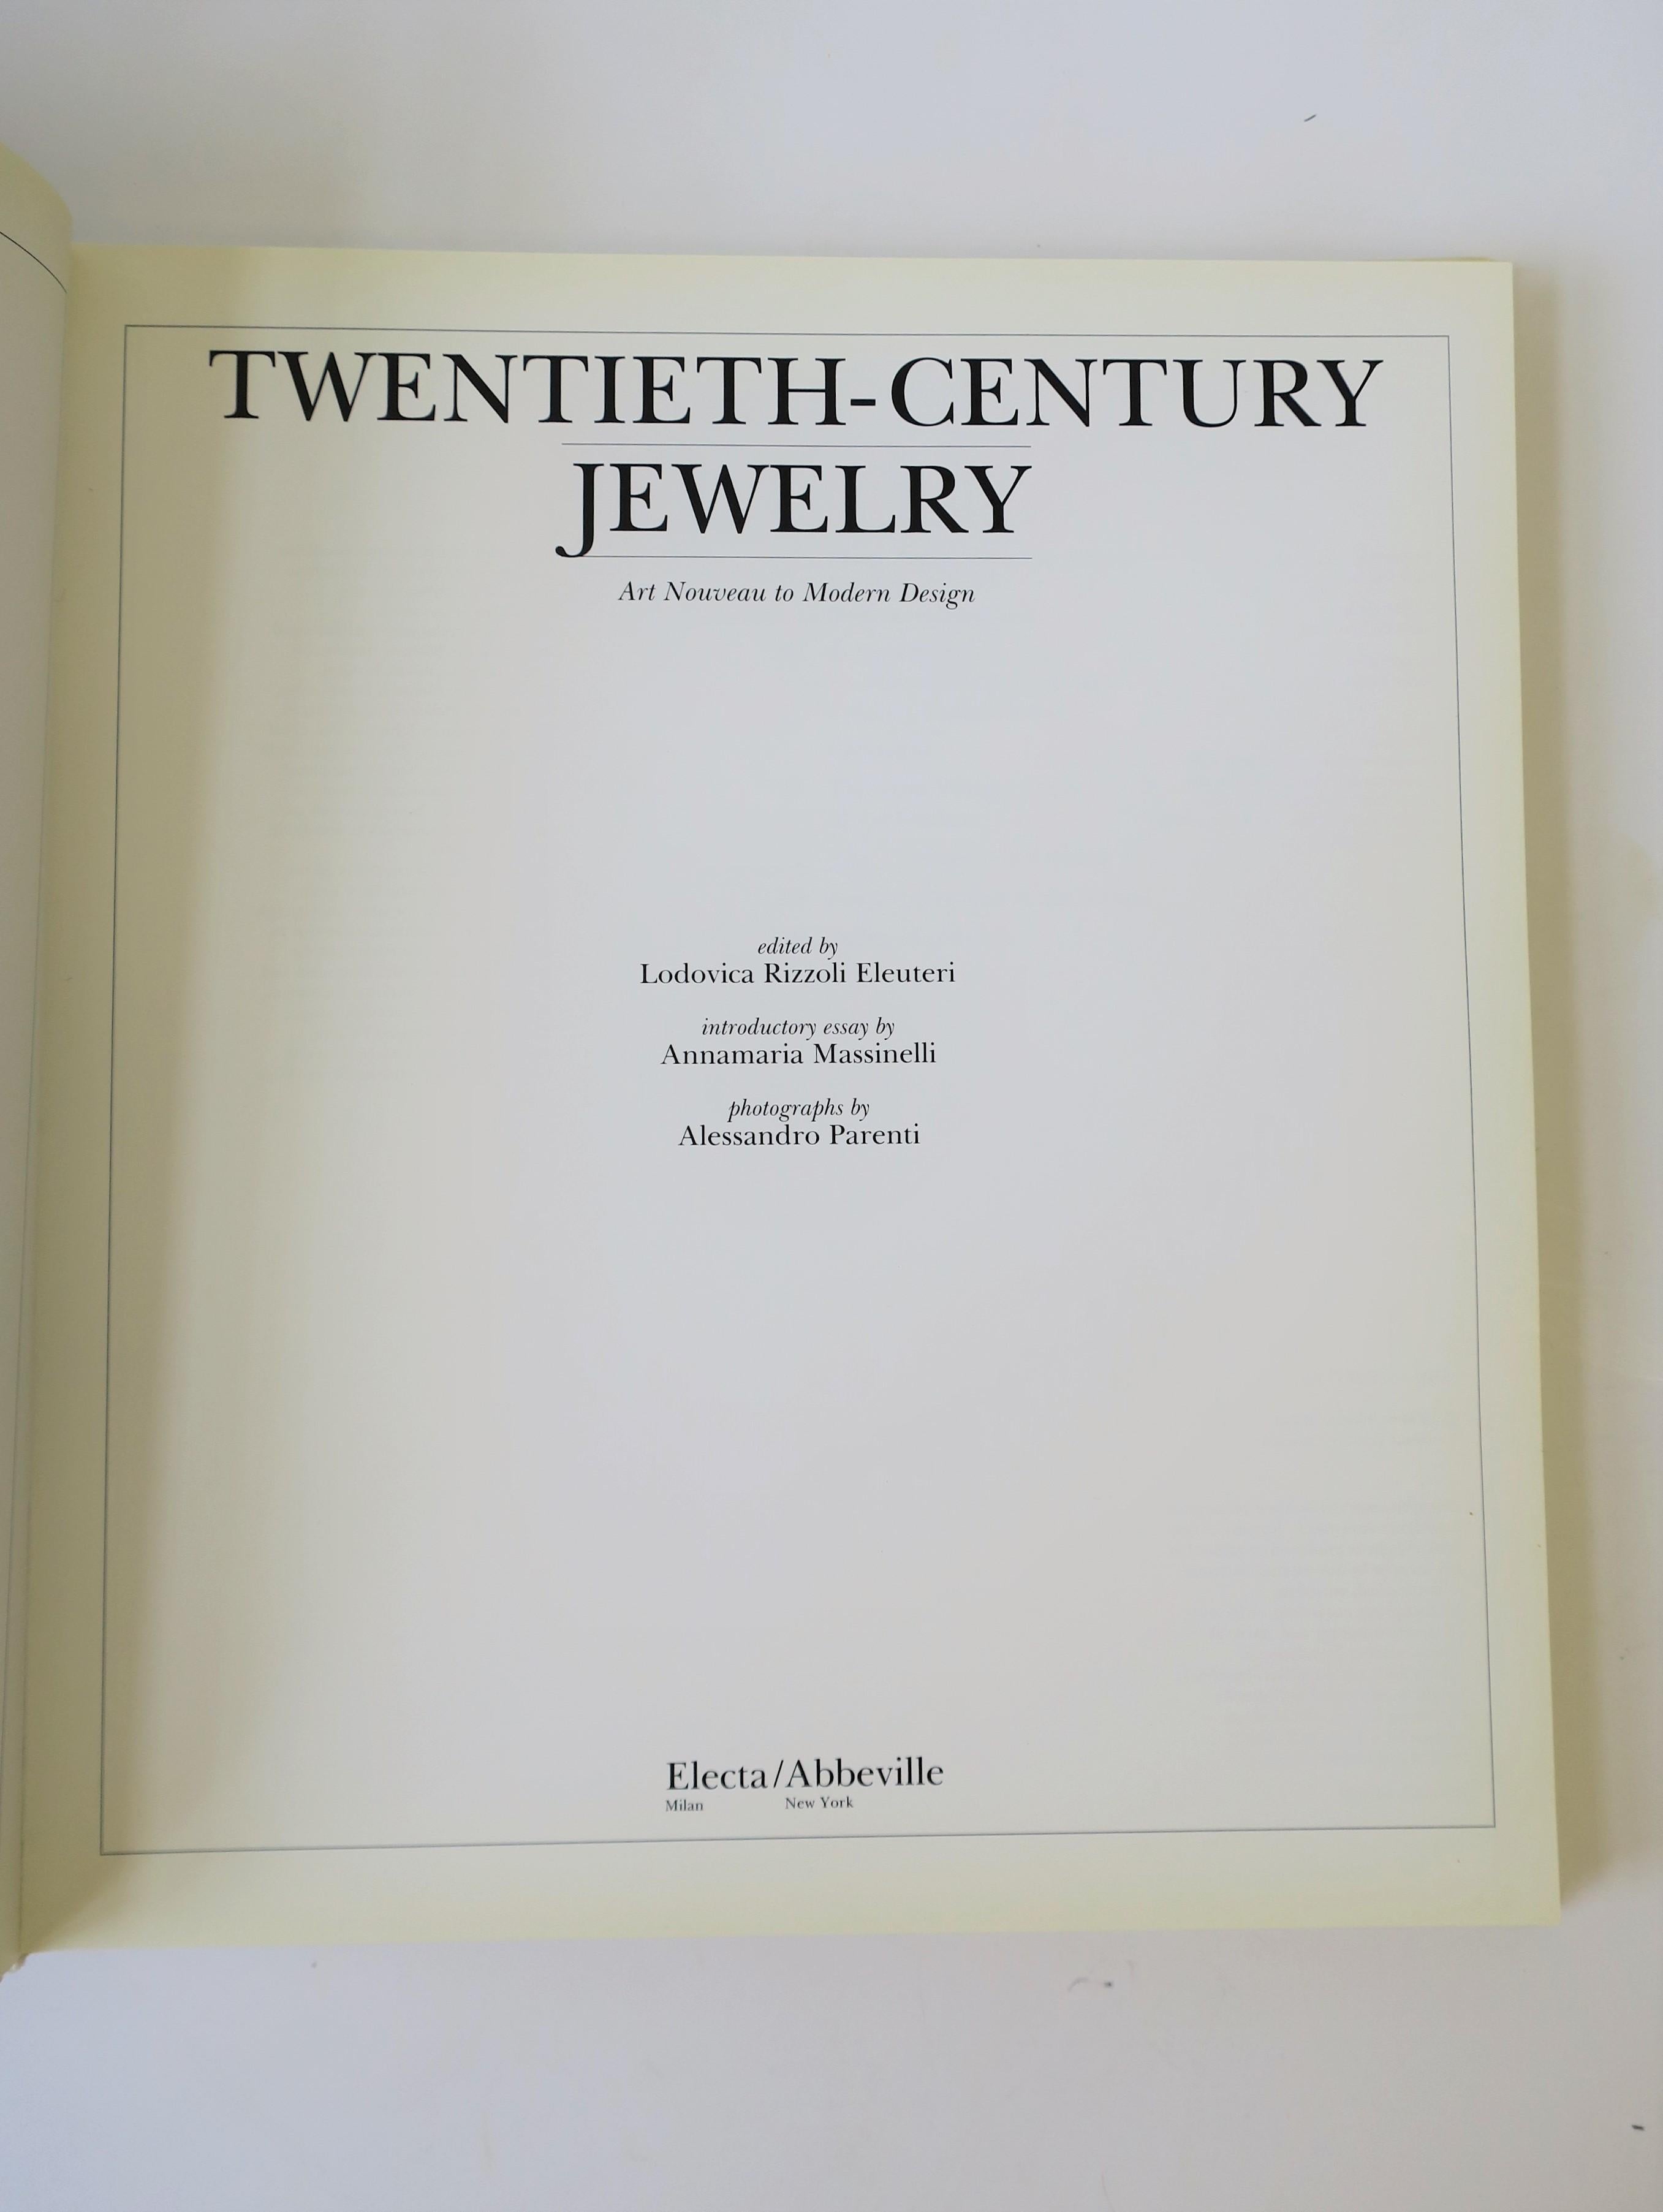 Italian 20th Century Jewelry Art Nouveau to Modern Coffee Table or Library Book, 1990s